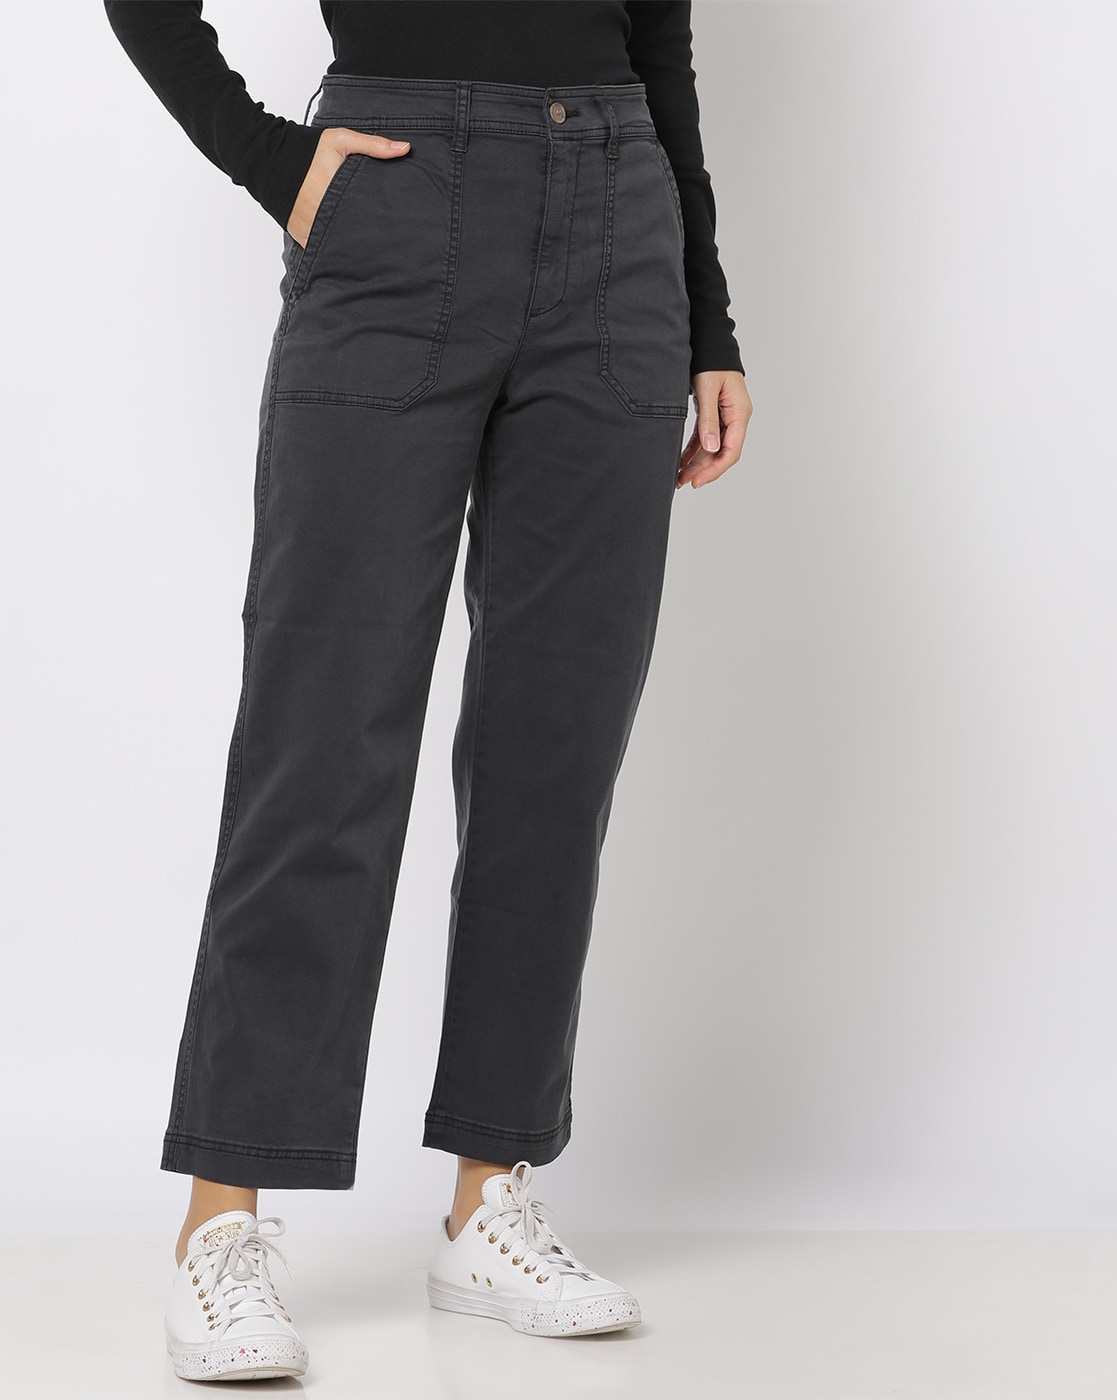 Citizens of Humanity Agni Utility Trouser Jeans  Anthropologie Korea   Womens Clothing Accessories  Home